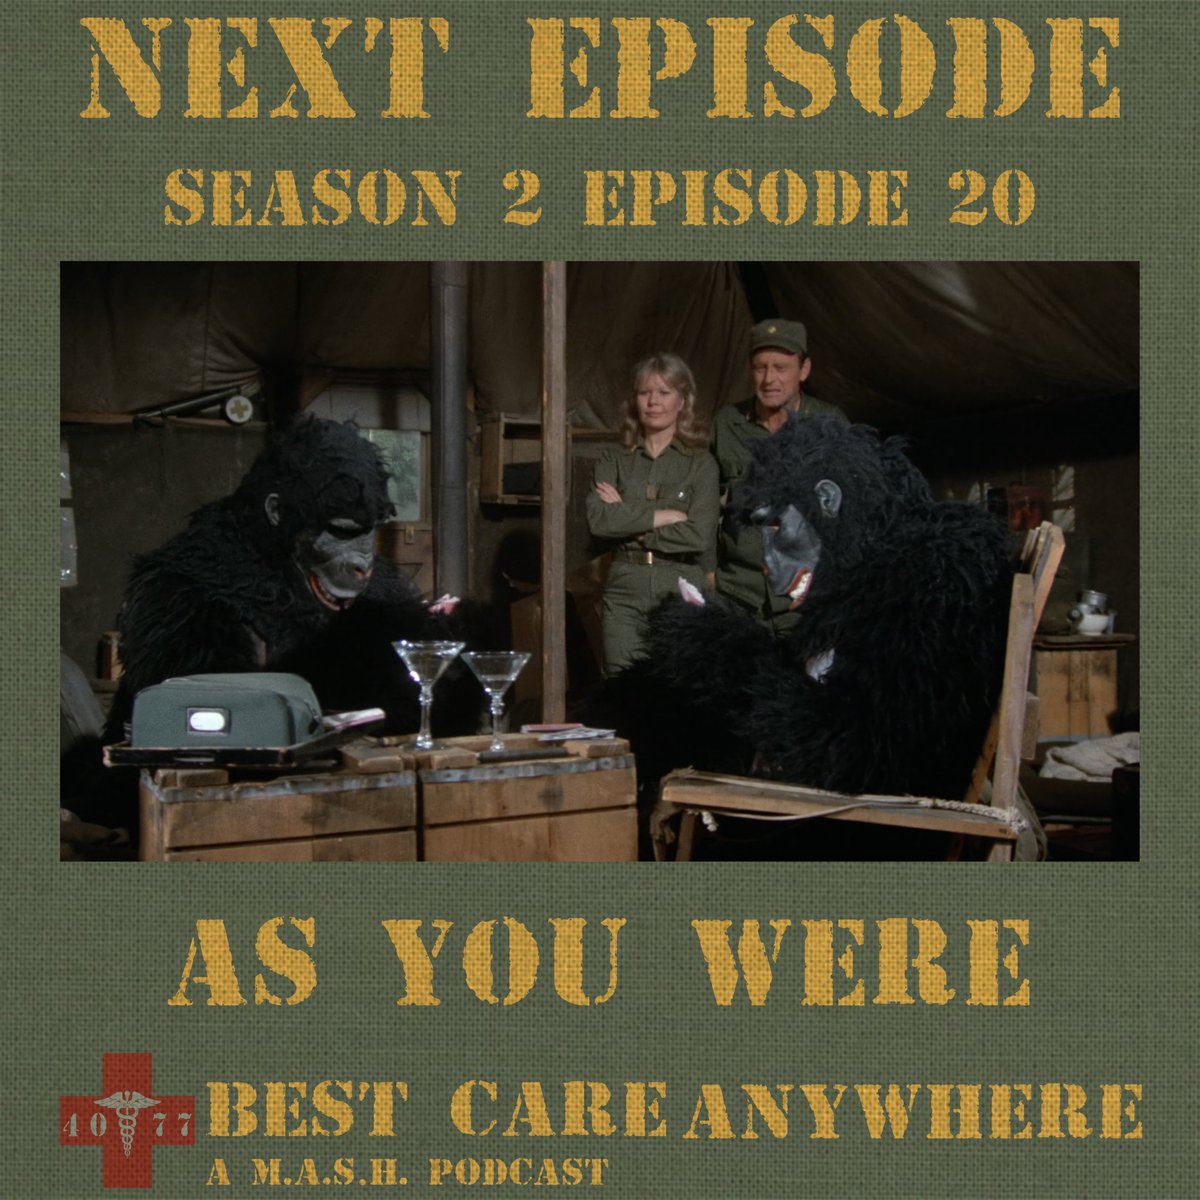 NEXT EPISODE:: 'As You Were' (S2-E20)

Another great 'Day in the Life' episode with some iconic lines and scenes! Share your favorite moments along with your thoughts and ratings below.

#AsYouWere #MASH4077 #BestCareAnywhere #MeandtheMissus